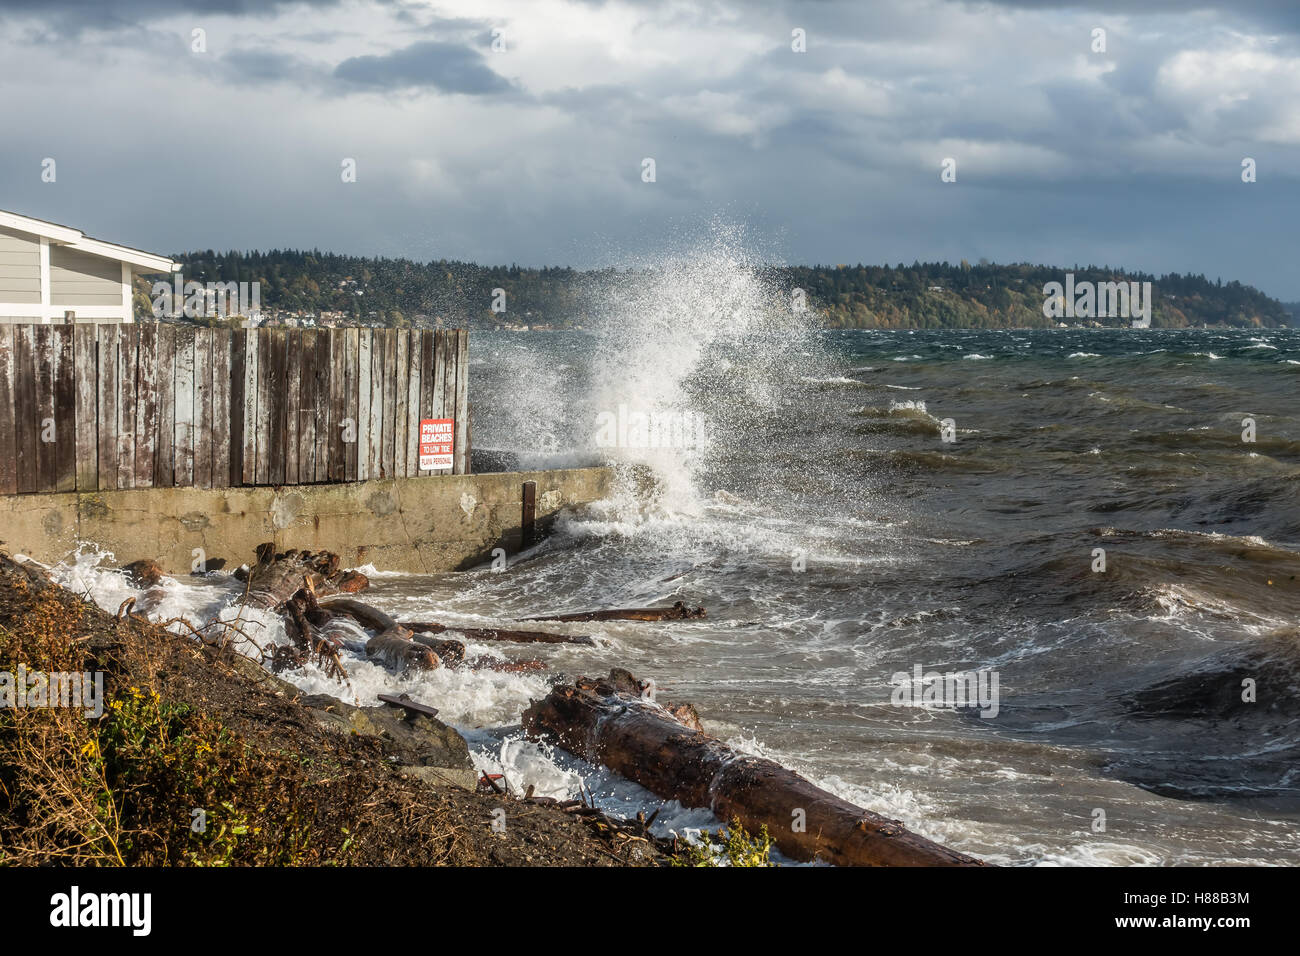 A view of the Puget Sound on a stormy  day. Shot taken from Burien, Washington. Stock Photo